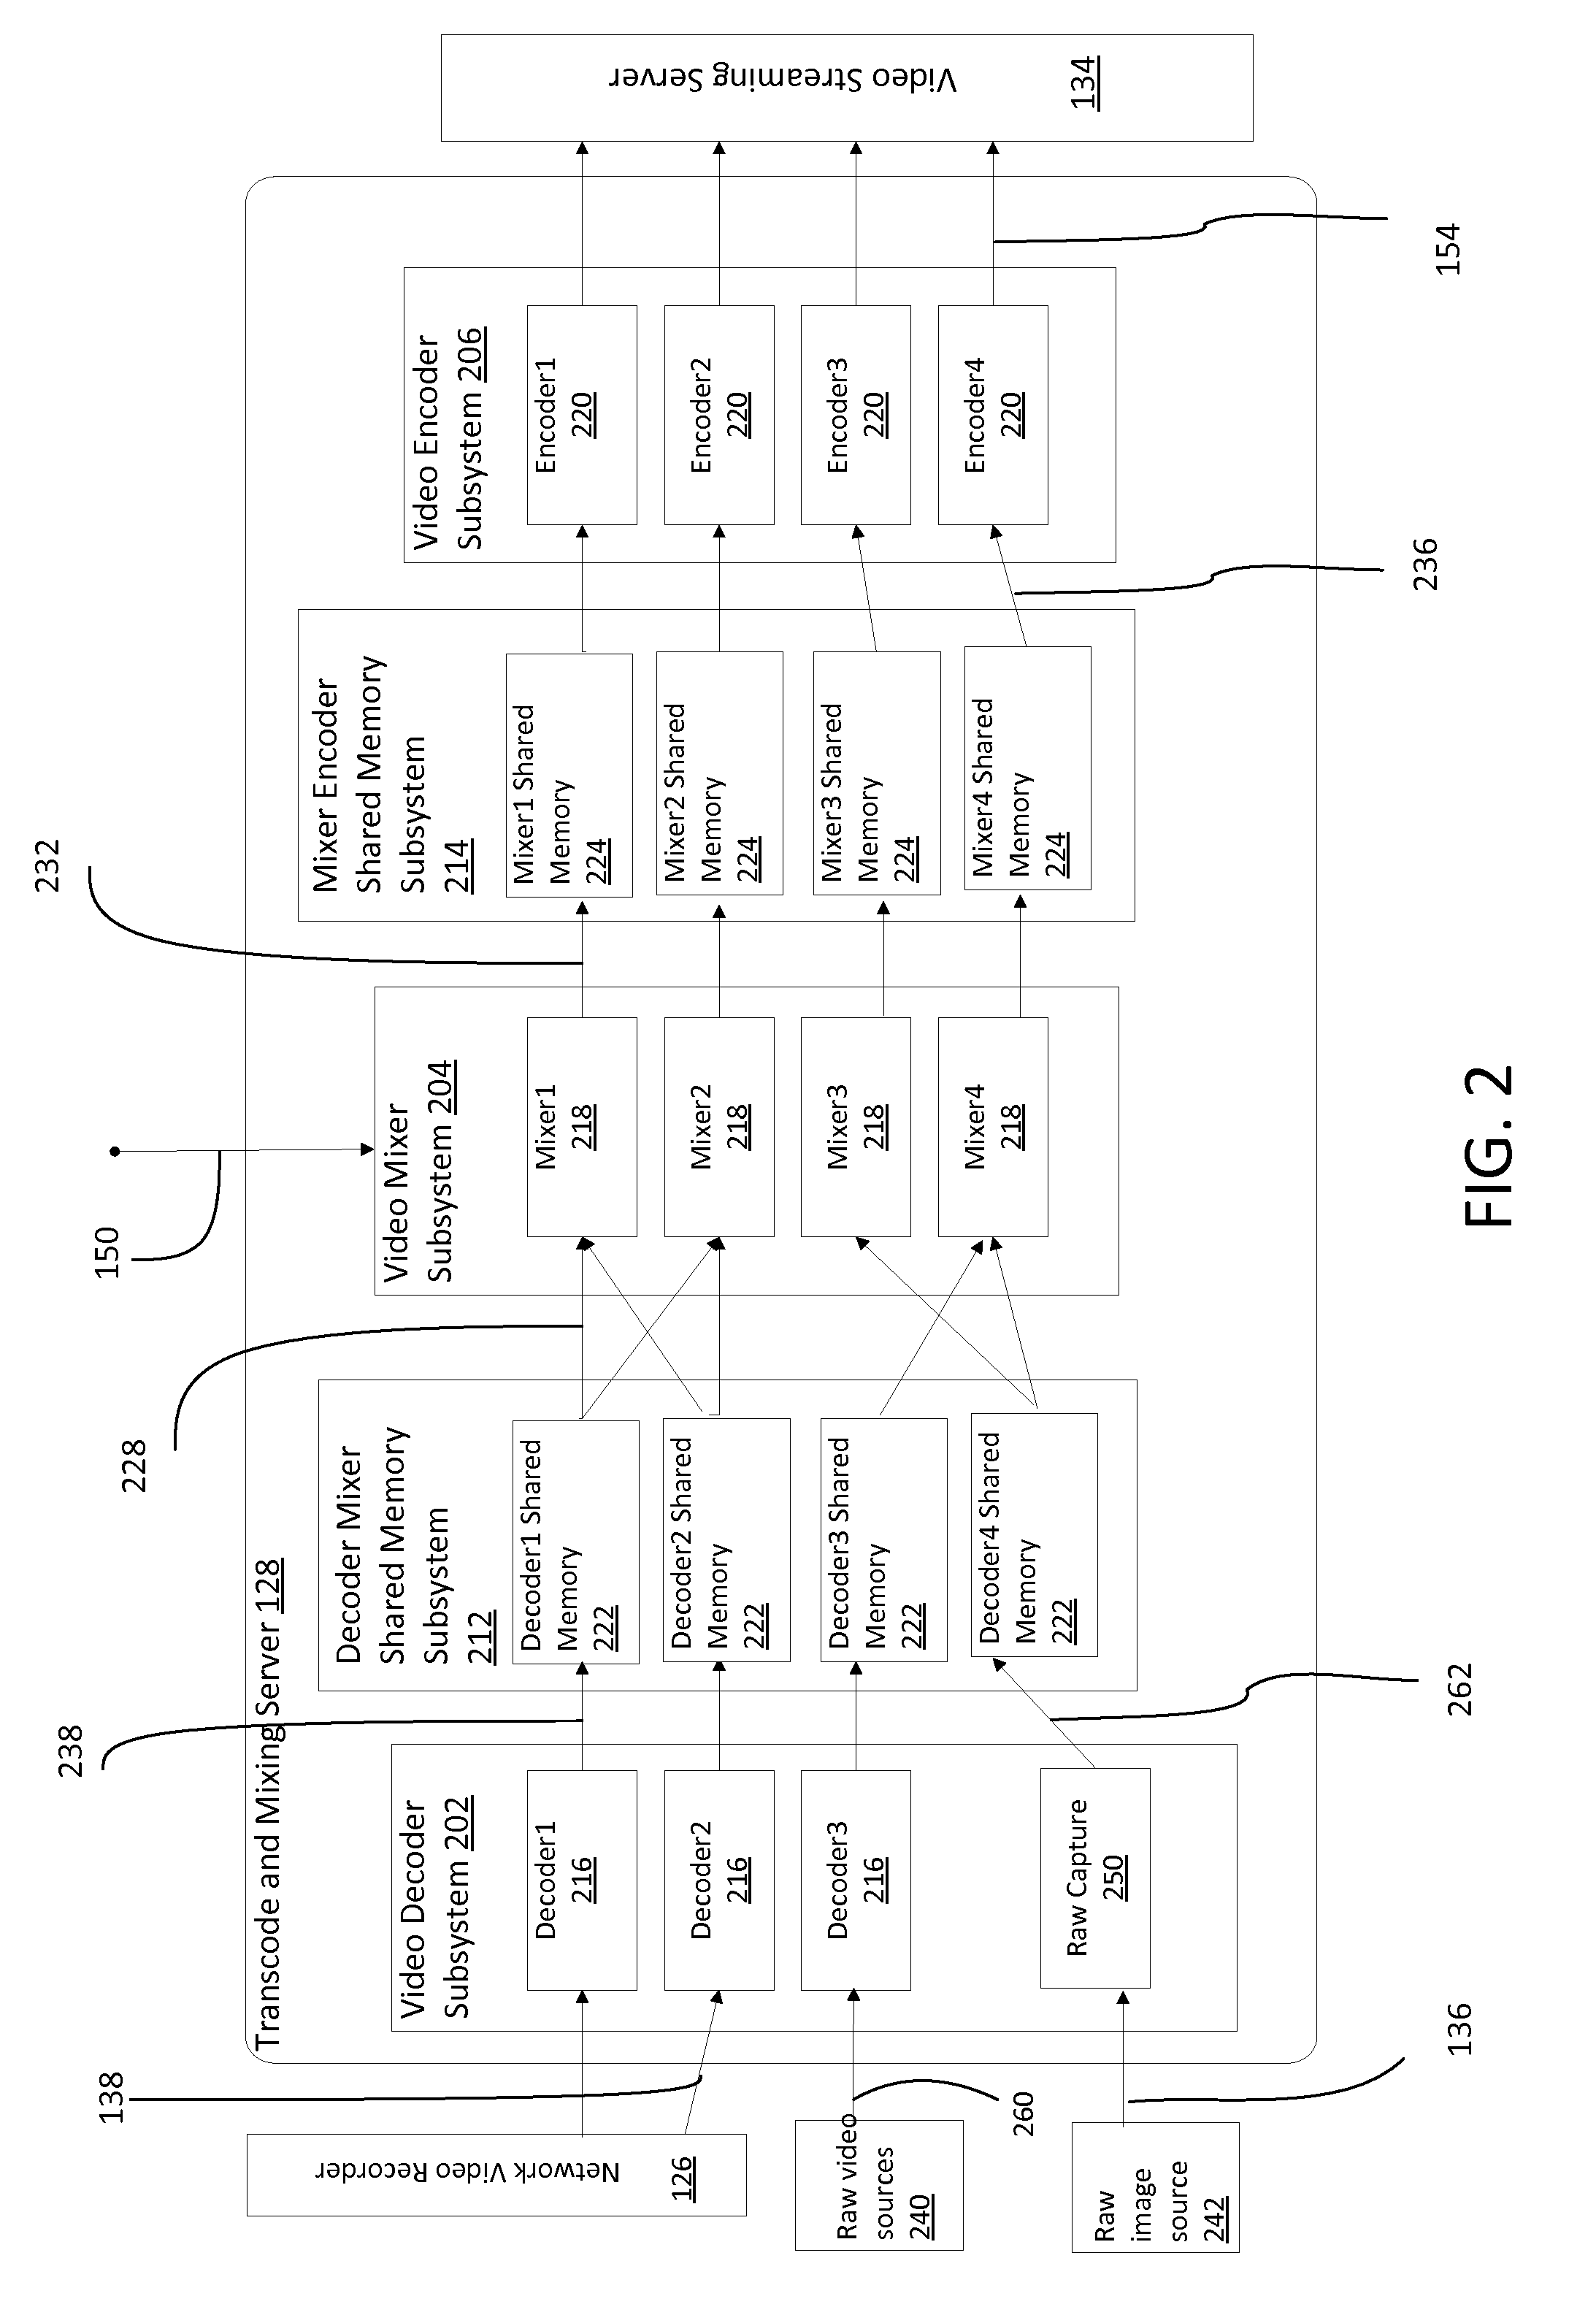 Transcoding mixing and distribution system and method for a video security system